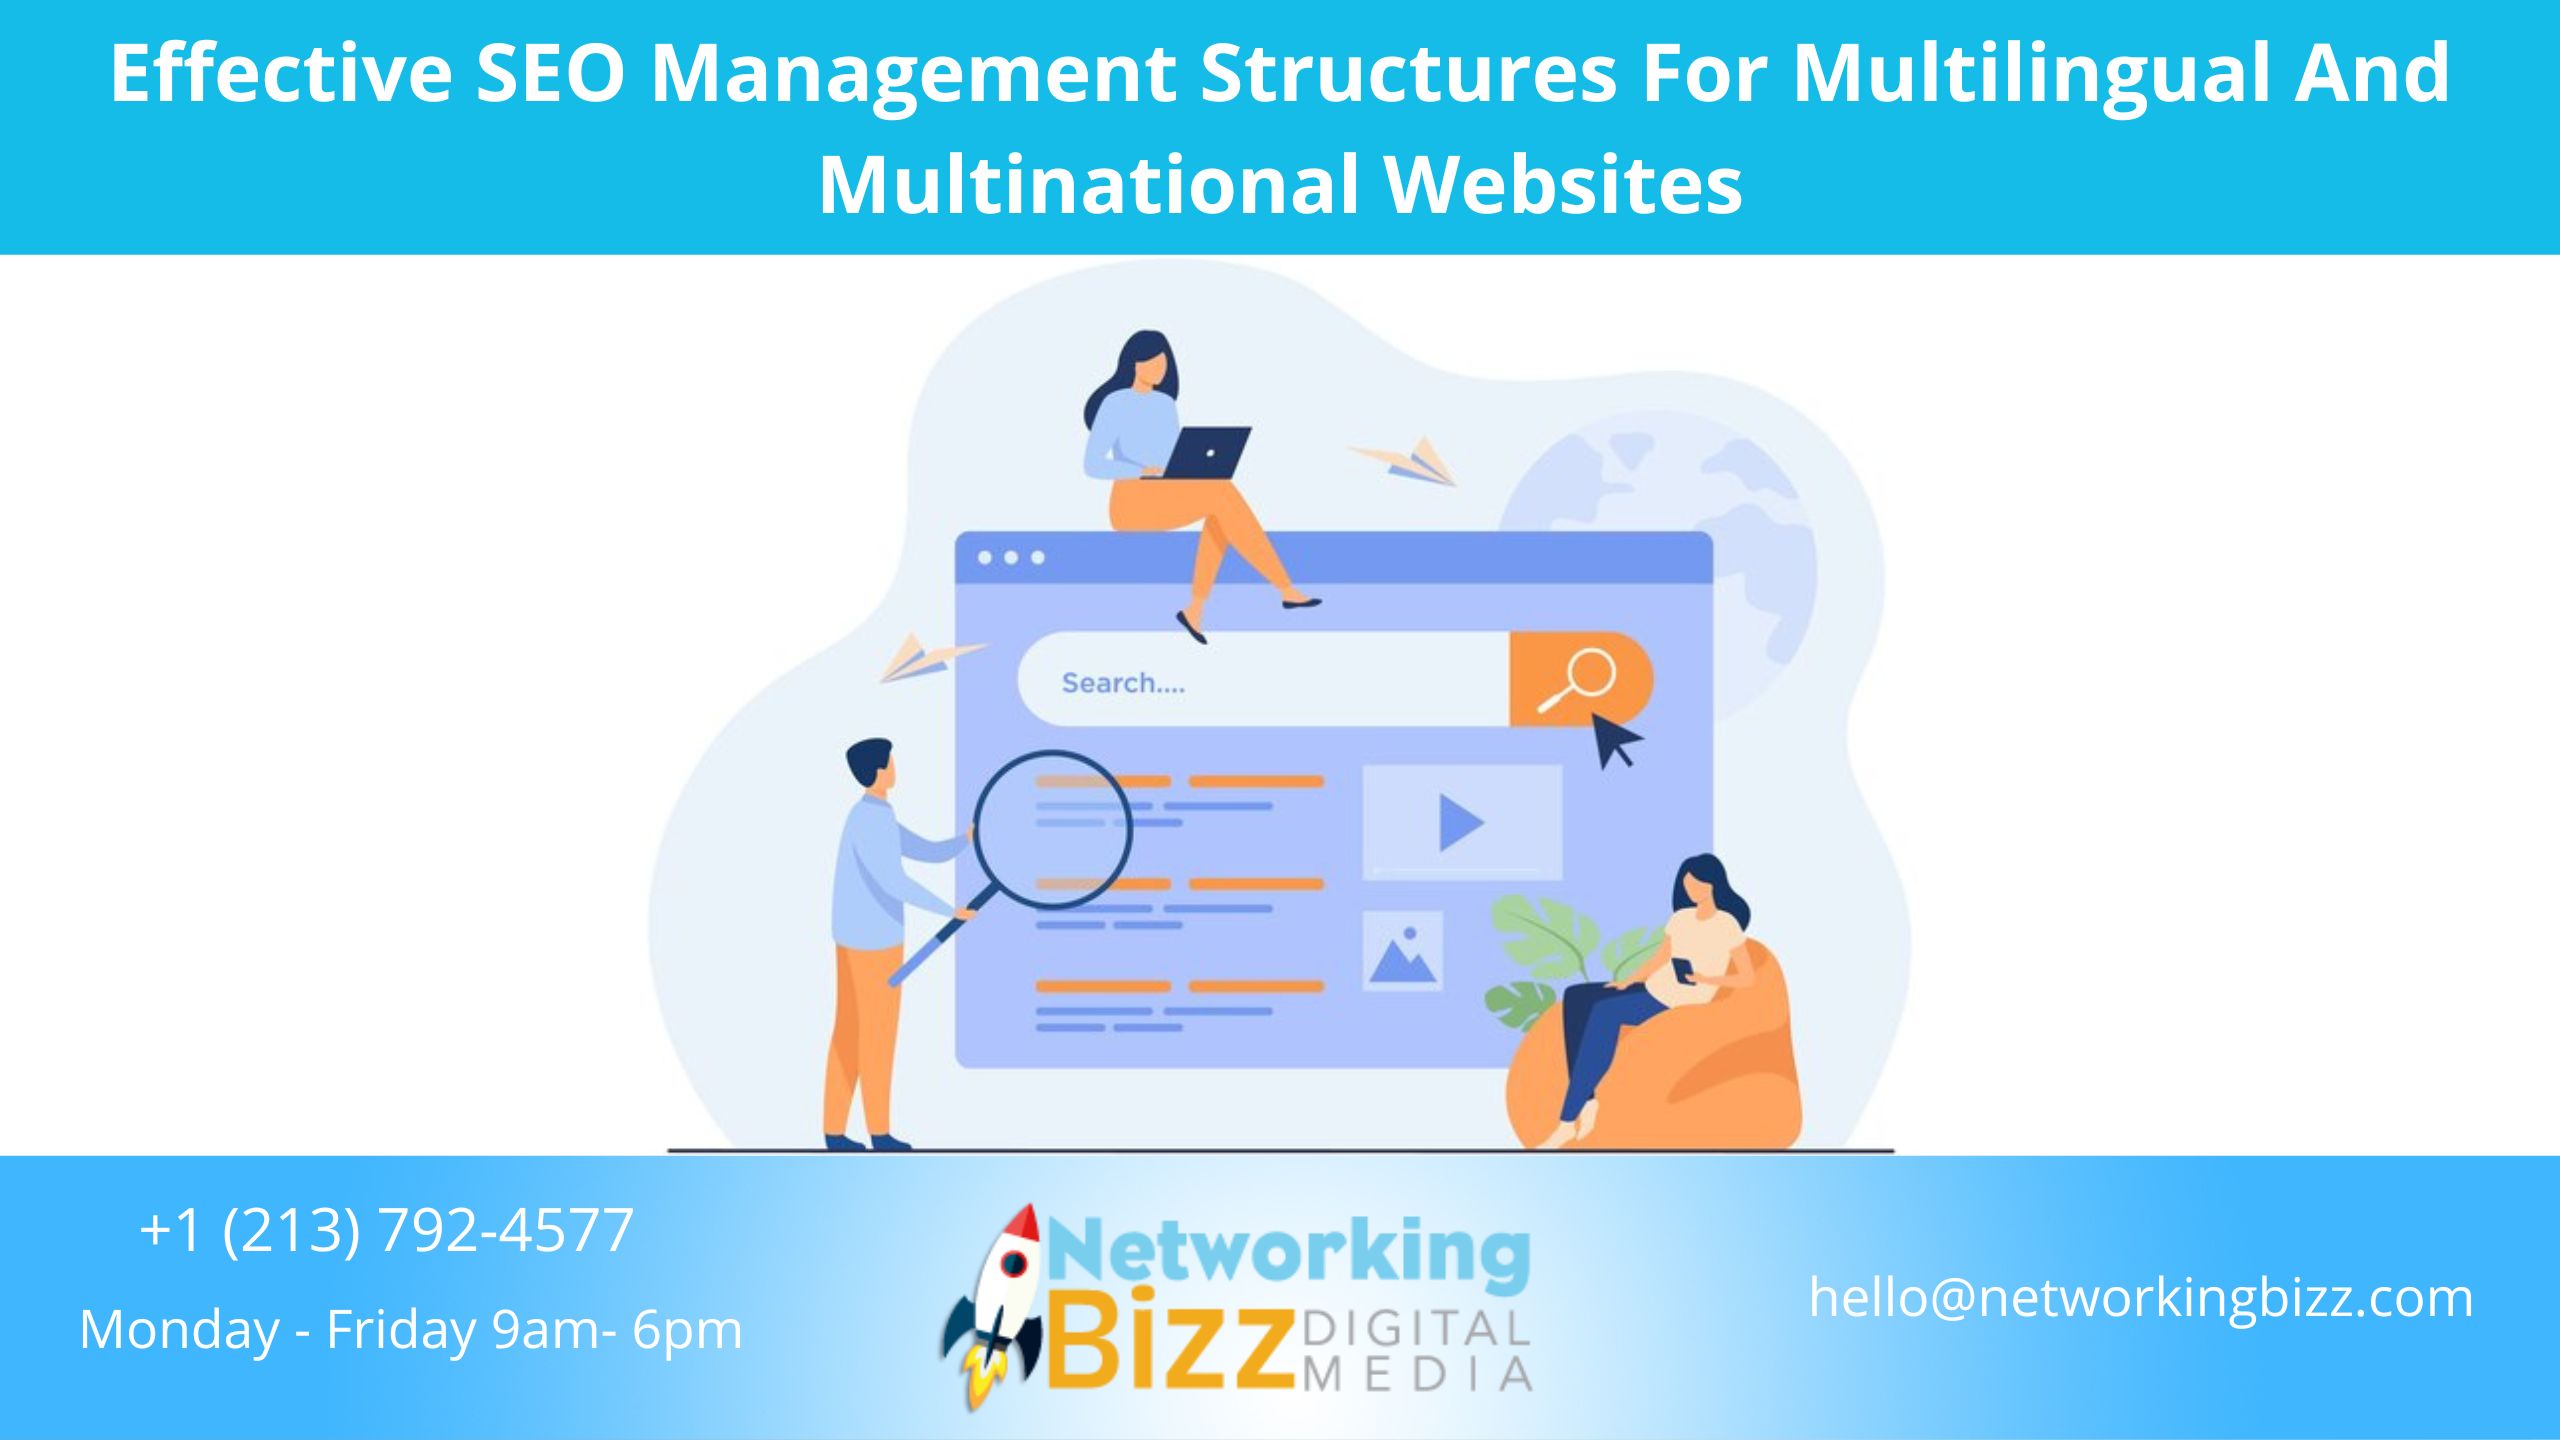 Effective SEO Management Structures For Multilingual And Multinational Websites